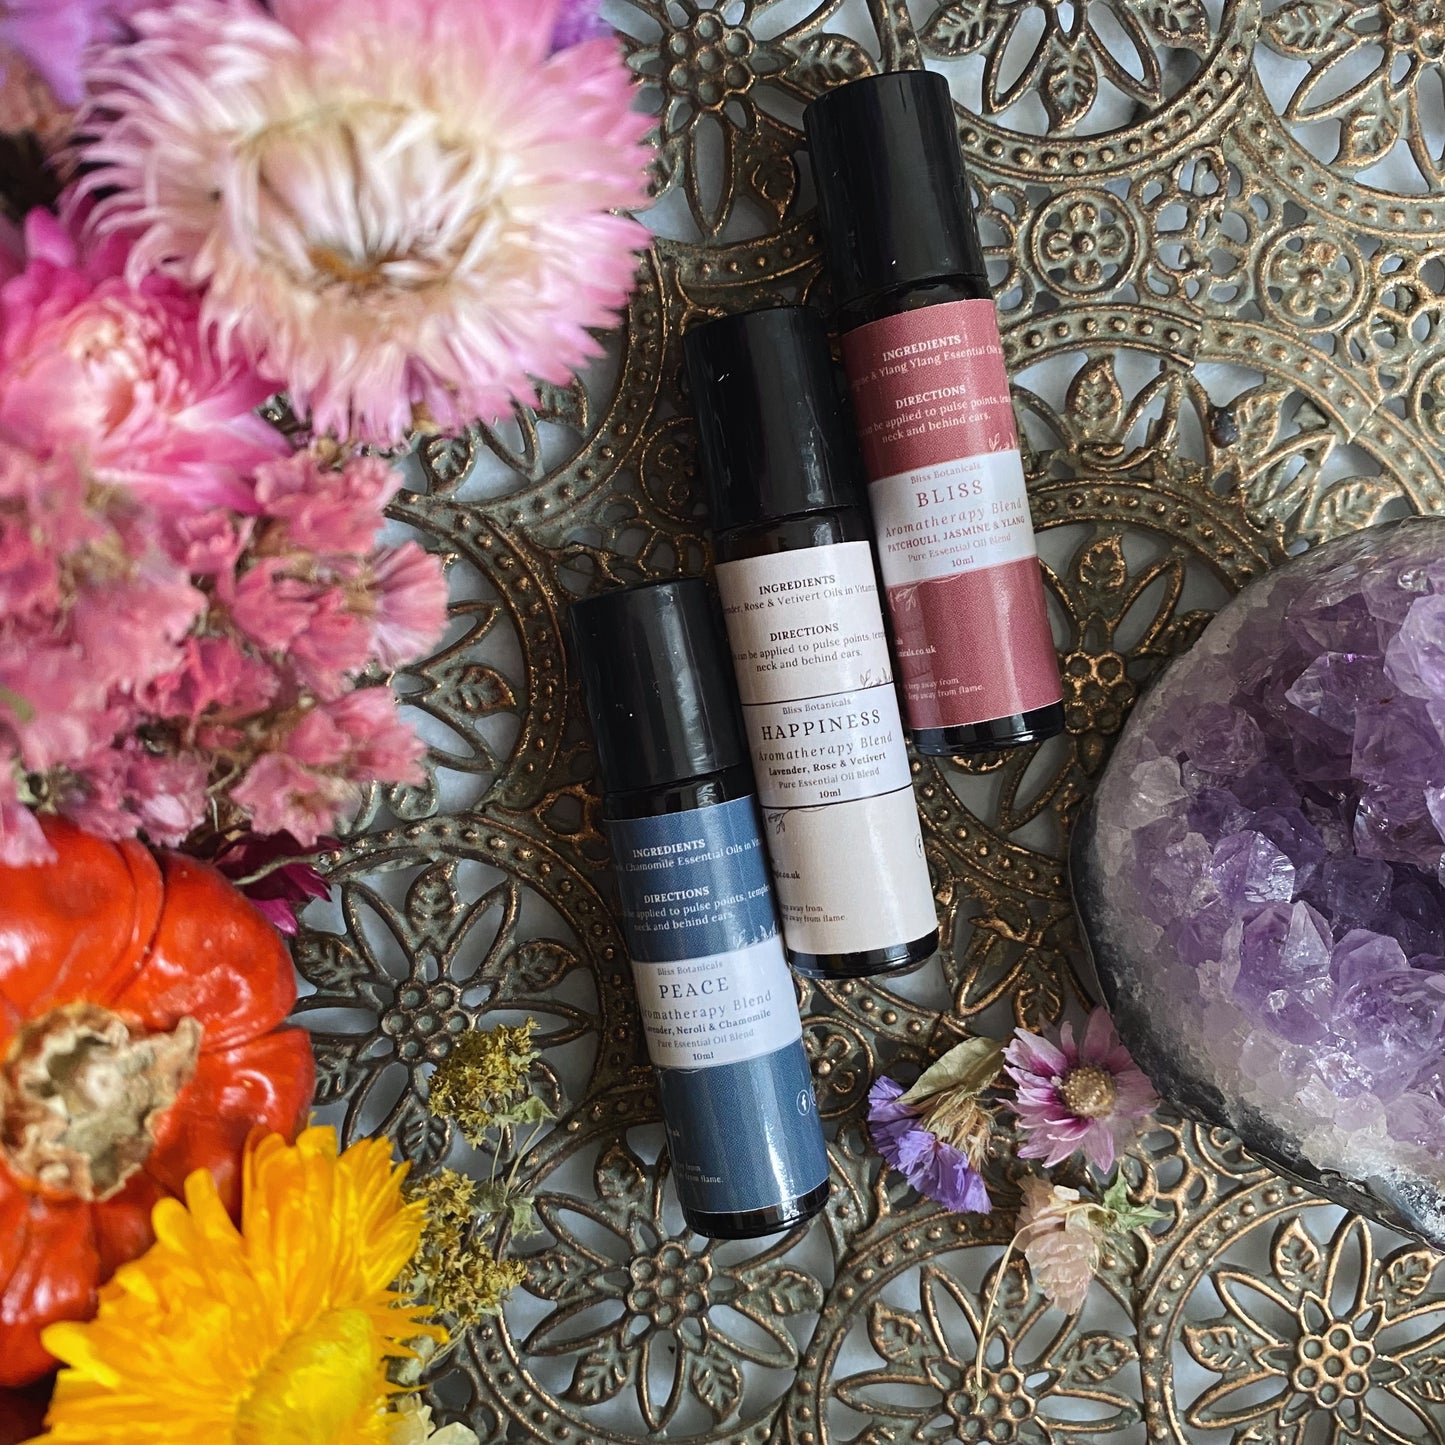 Roll On Aromatherapy Blends